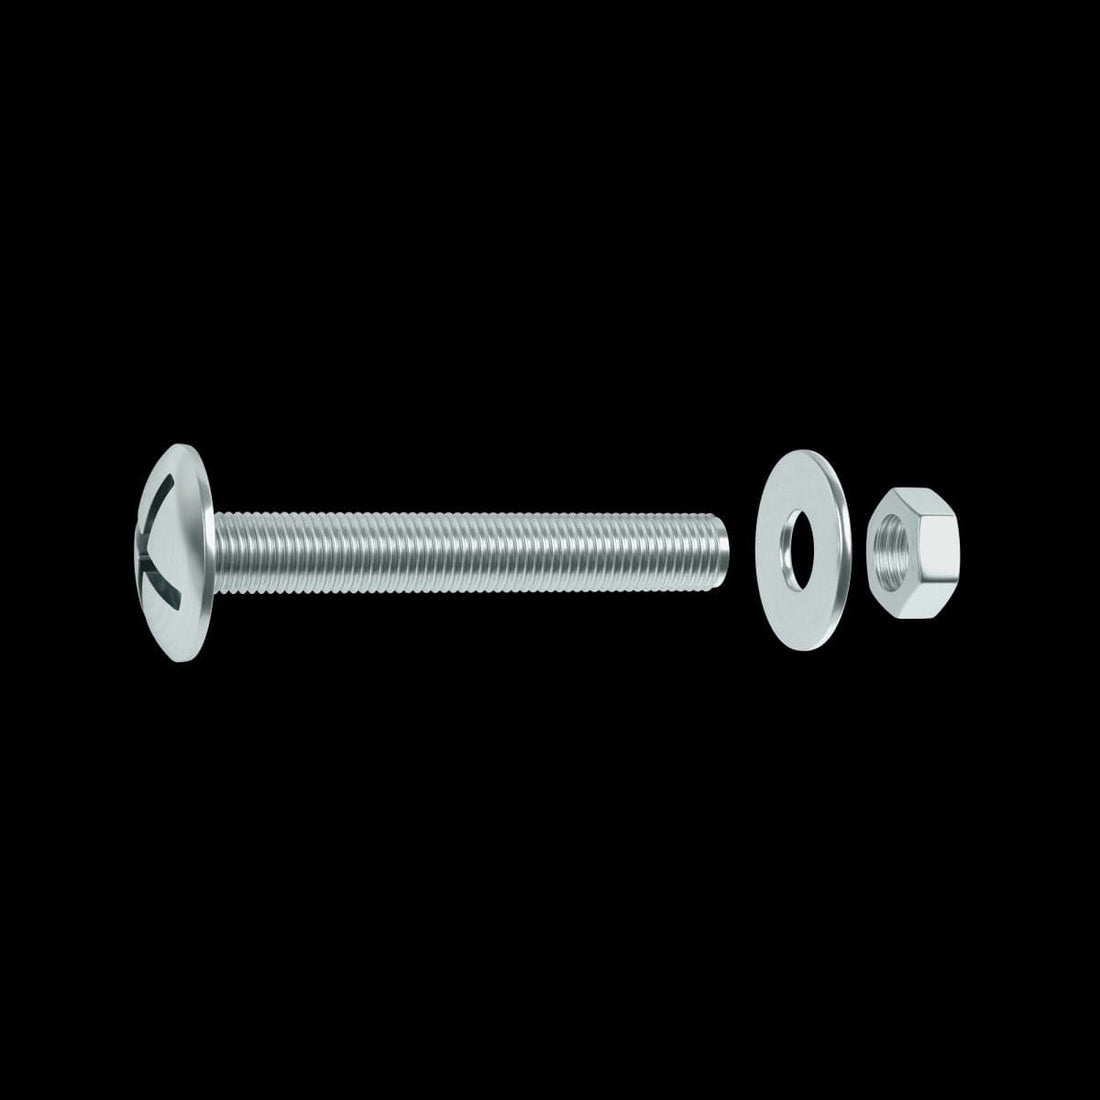 BOLT 6 X 60 MM CROSS CAMBERED HEAD, STEEL NUT AND WASHER, 30 PIECES - best price from Maltashopper.com BR410006404